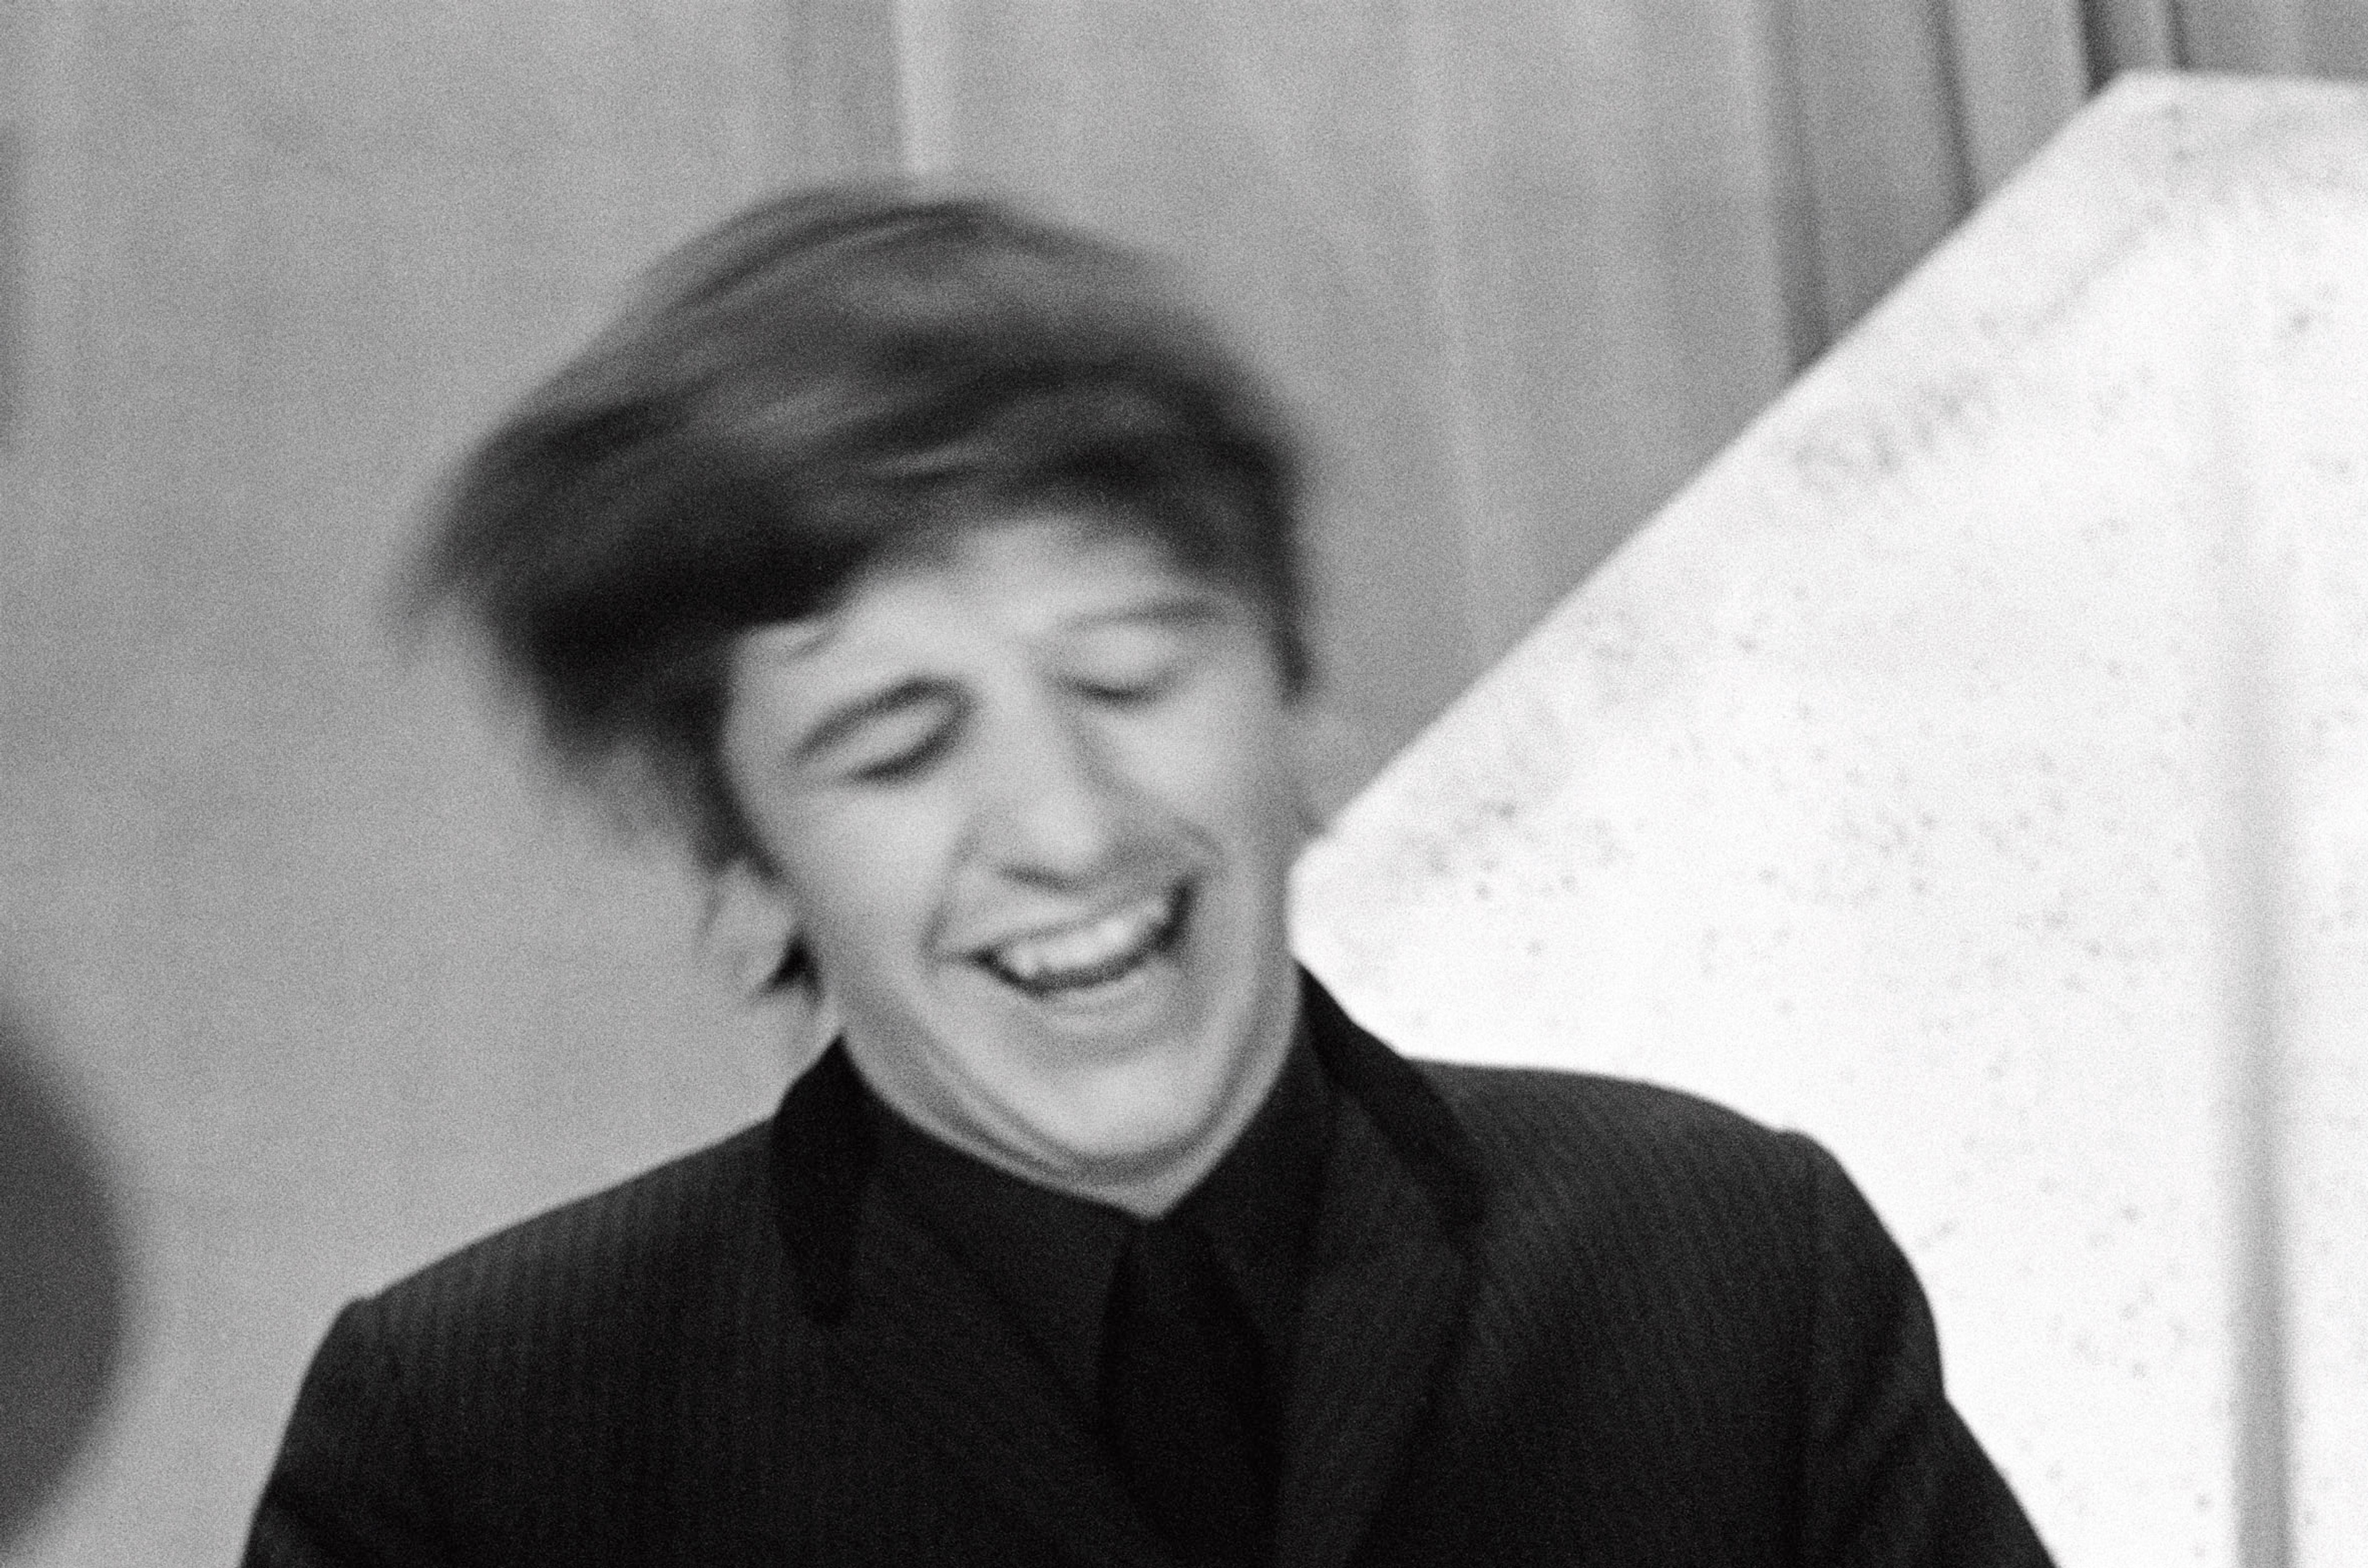 Black and white photograph of Ringo performing in London